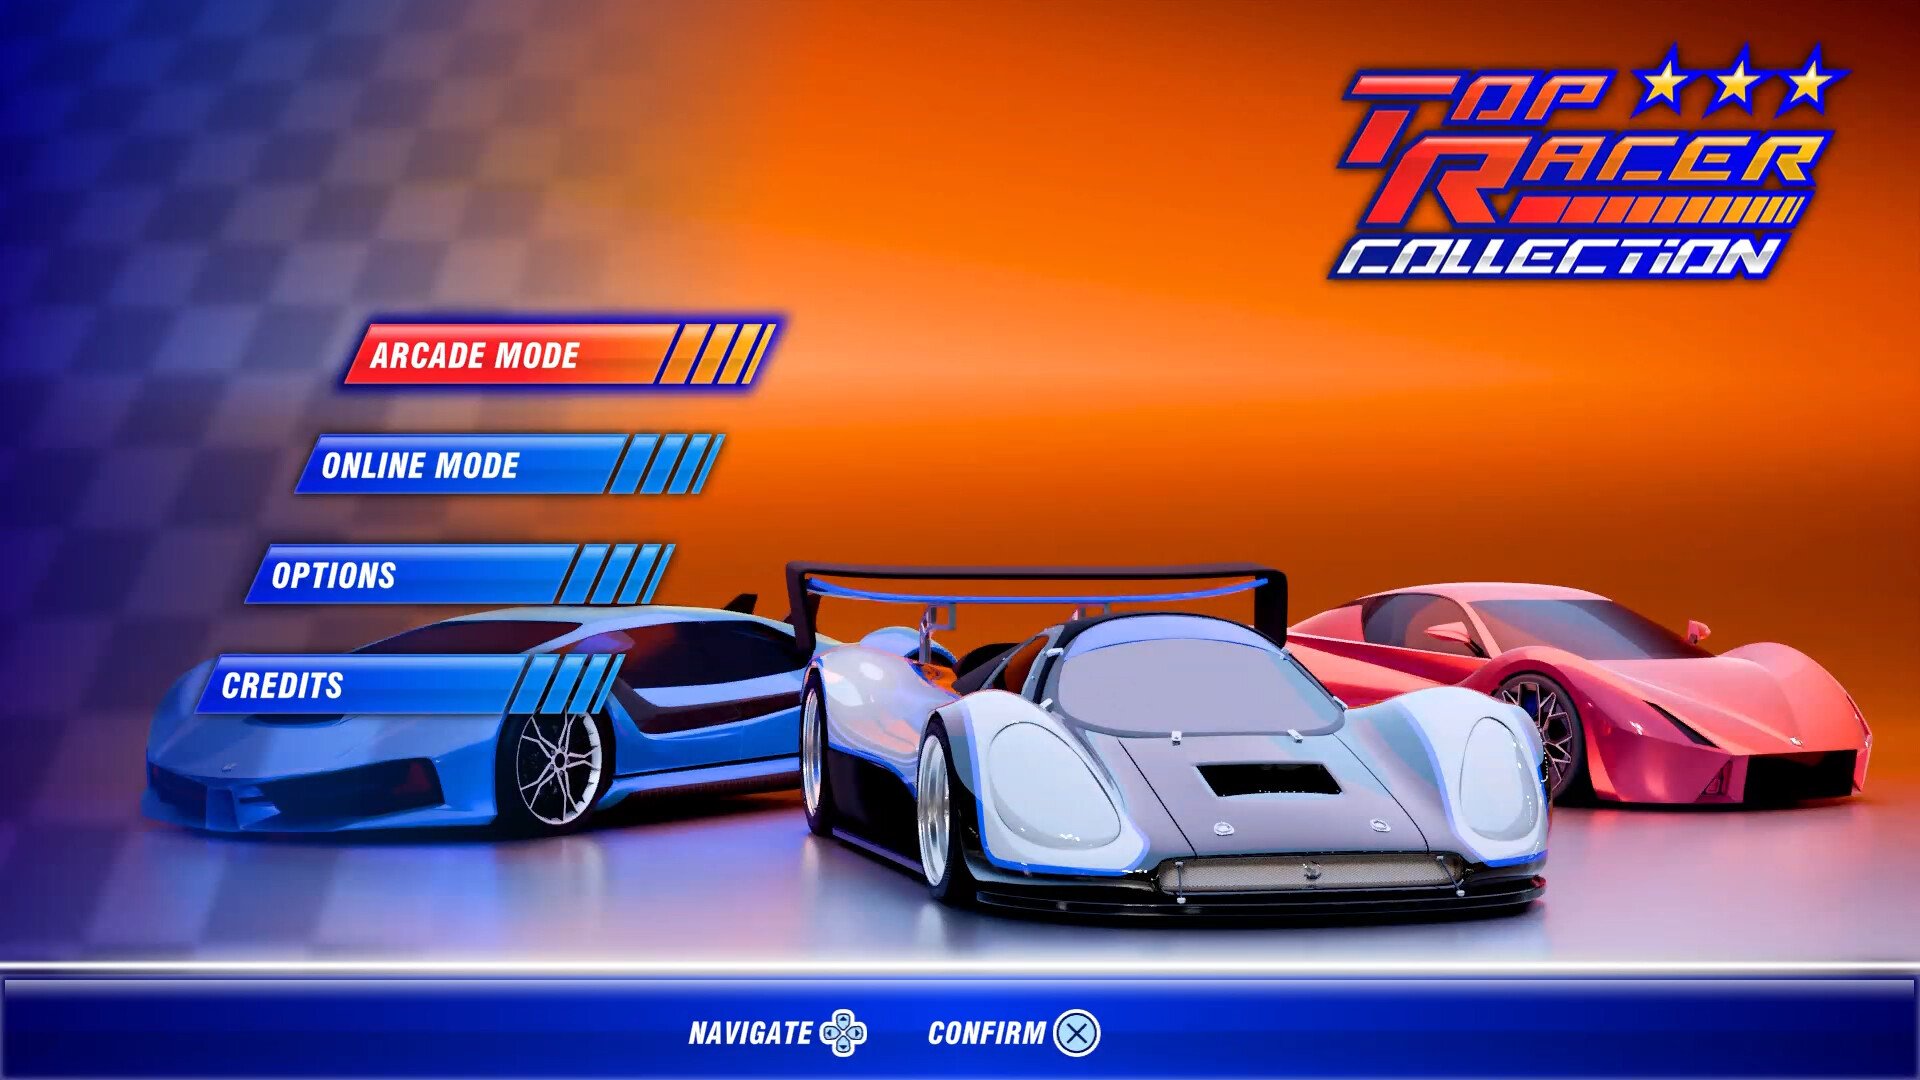 #
      Top Racer Collection delayed to March 7